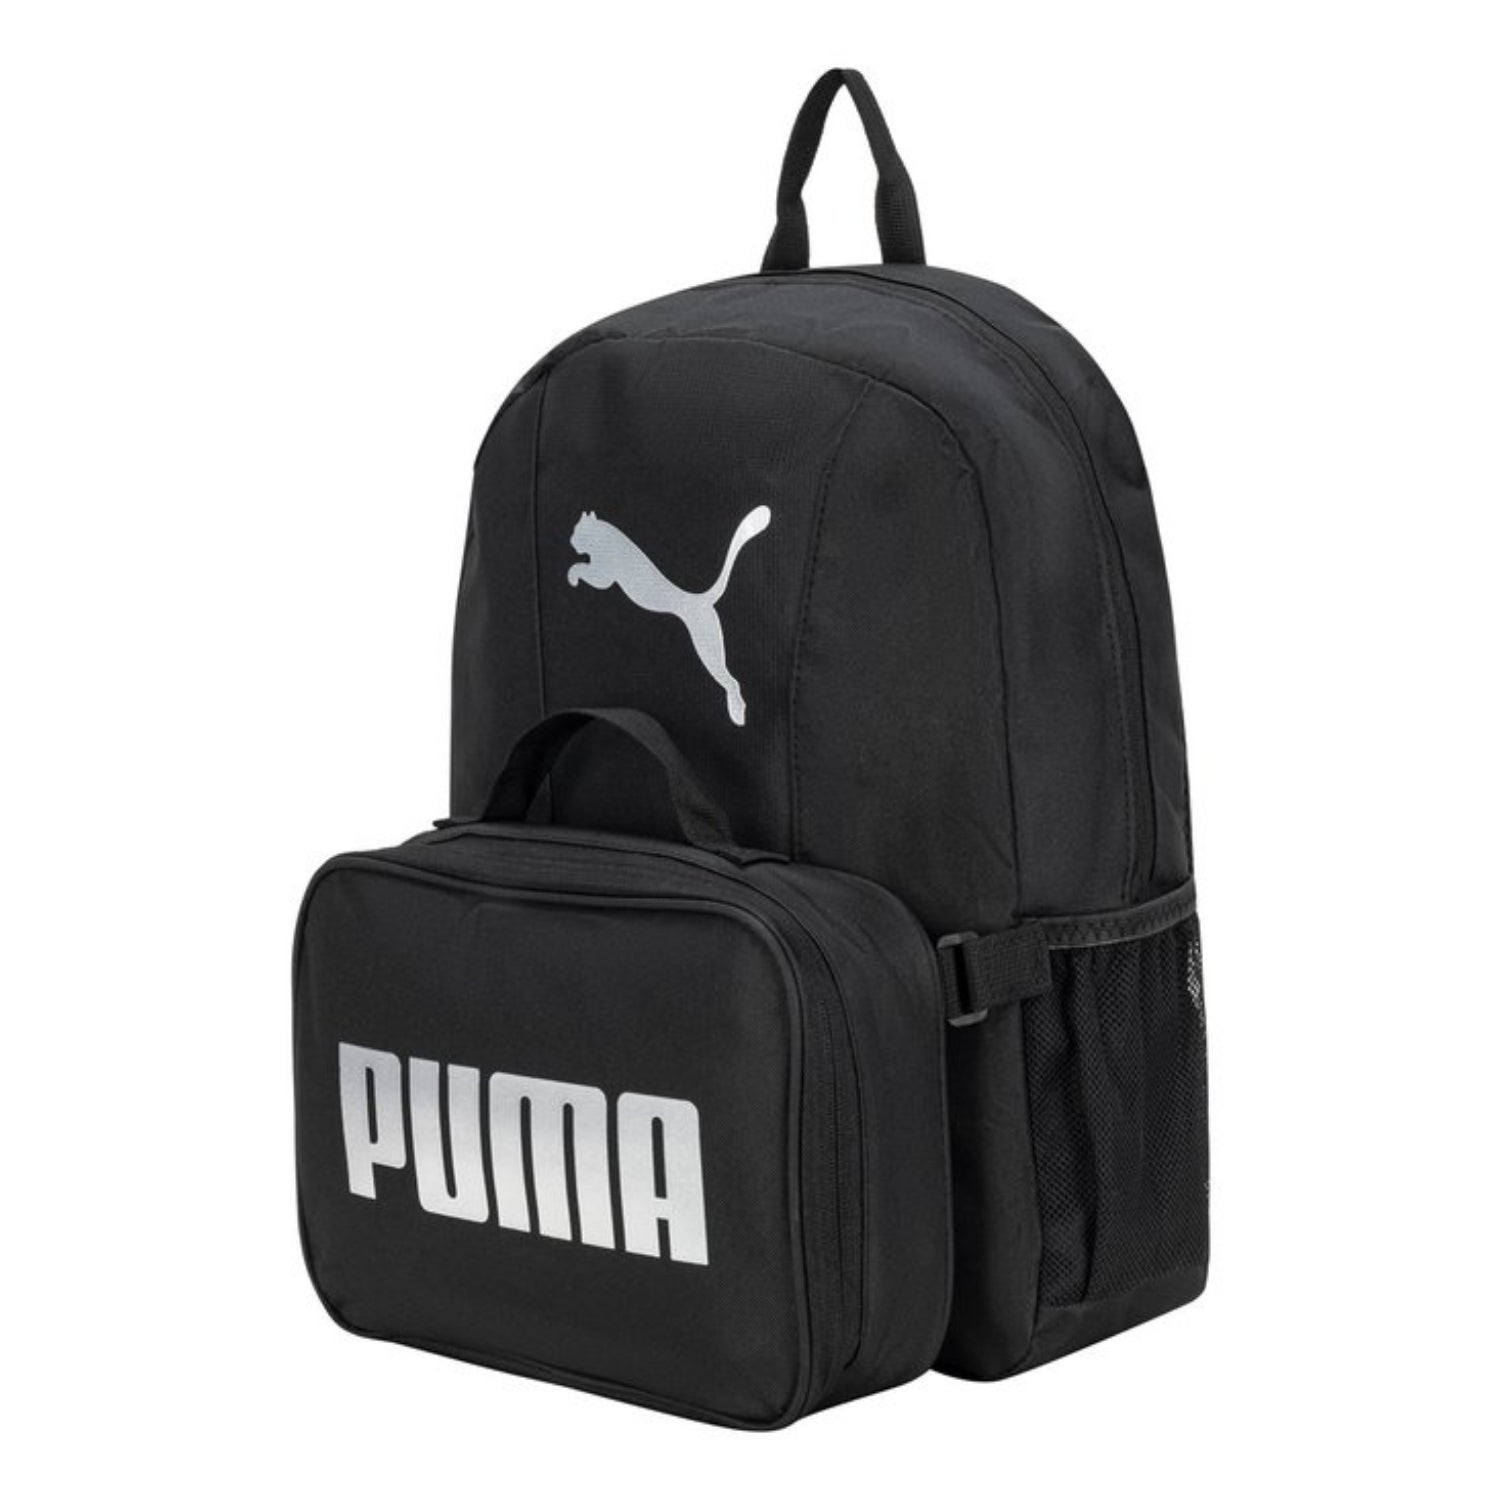 Puma Evercat Duo Combopack- Backpack and Lunchbag